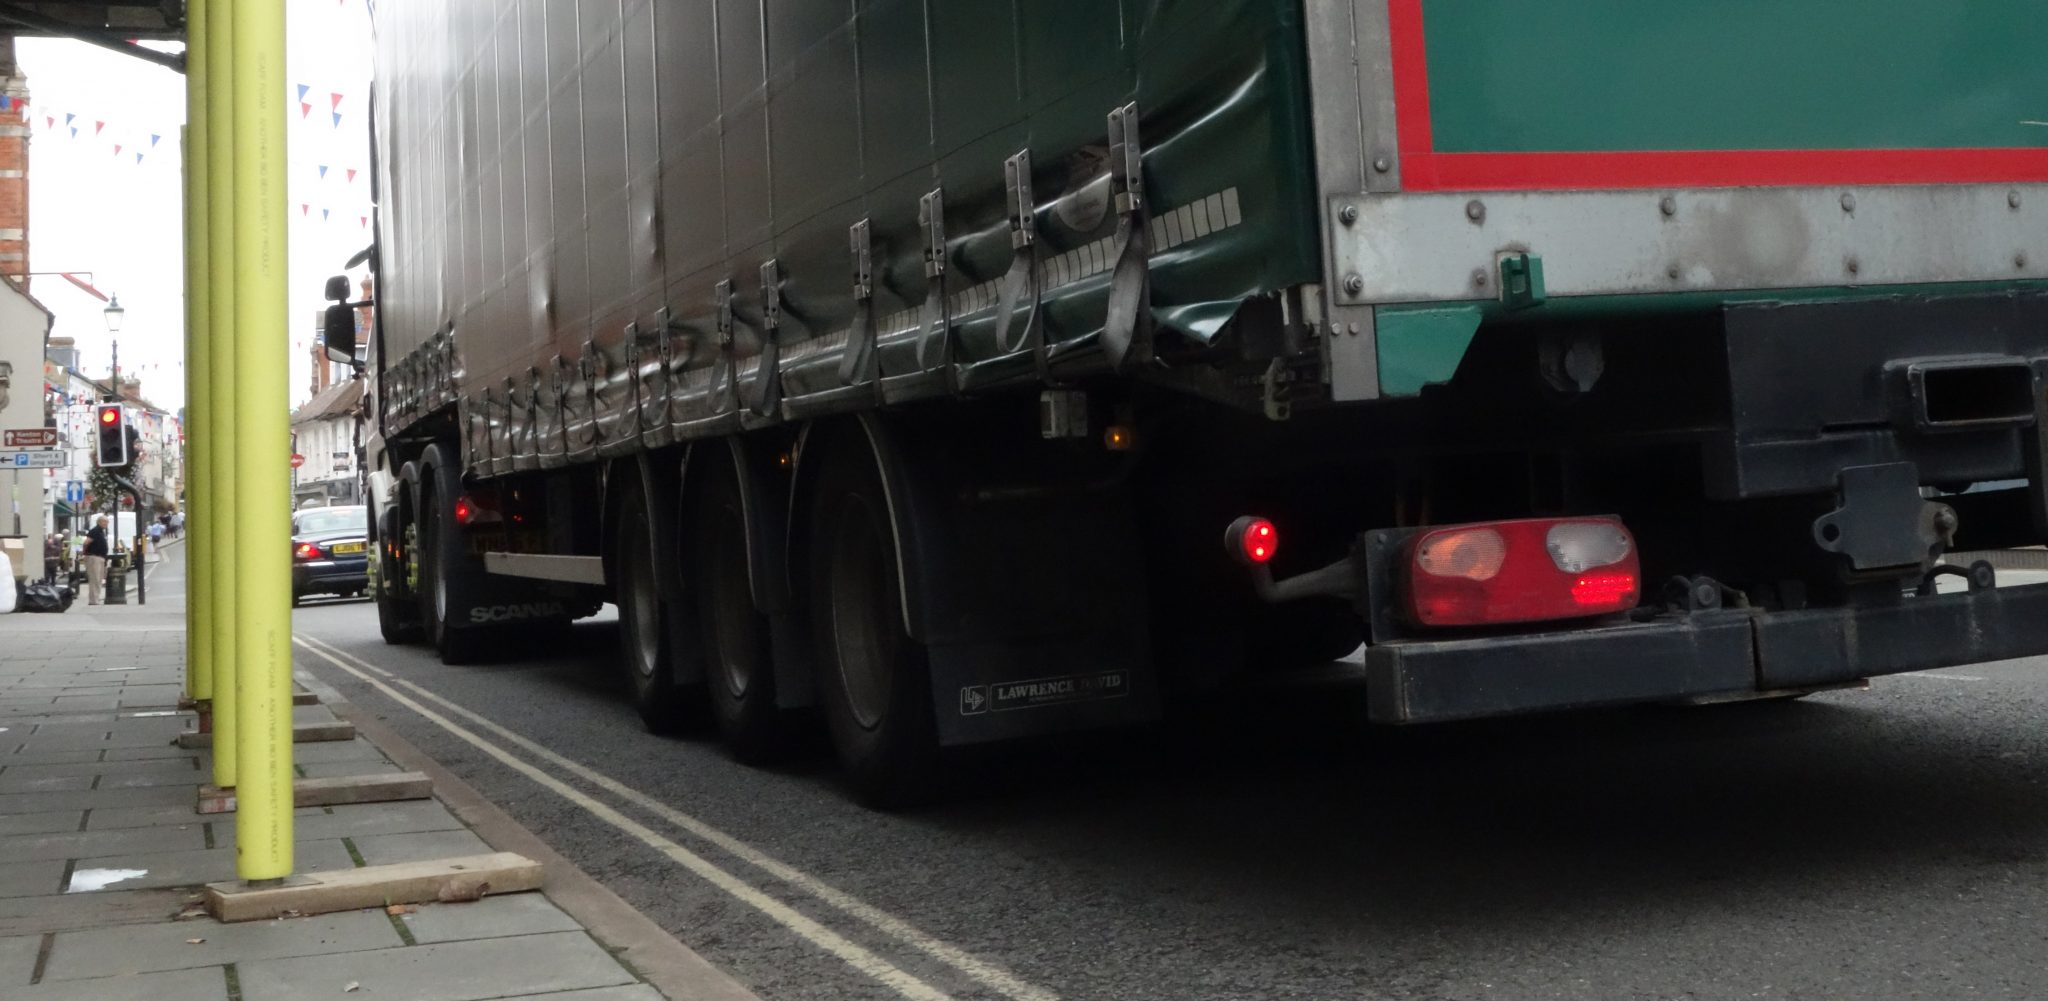 One step closer to a ban on HGVs